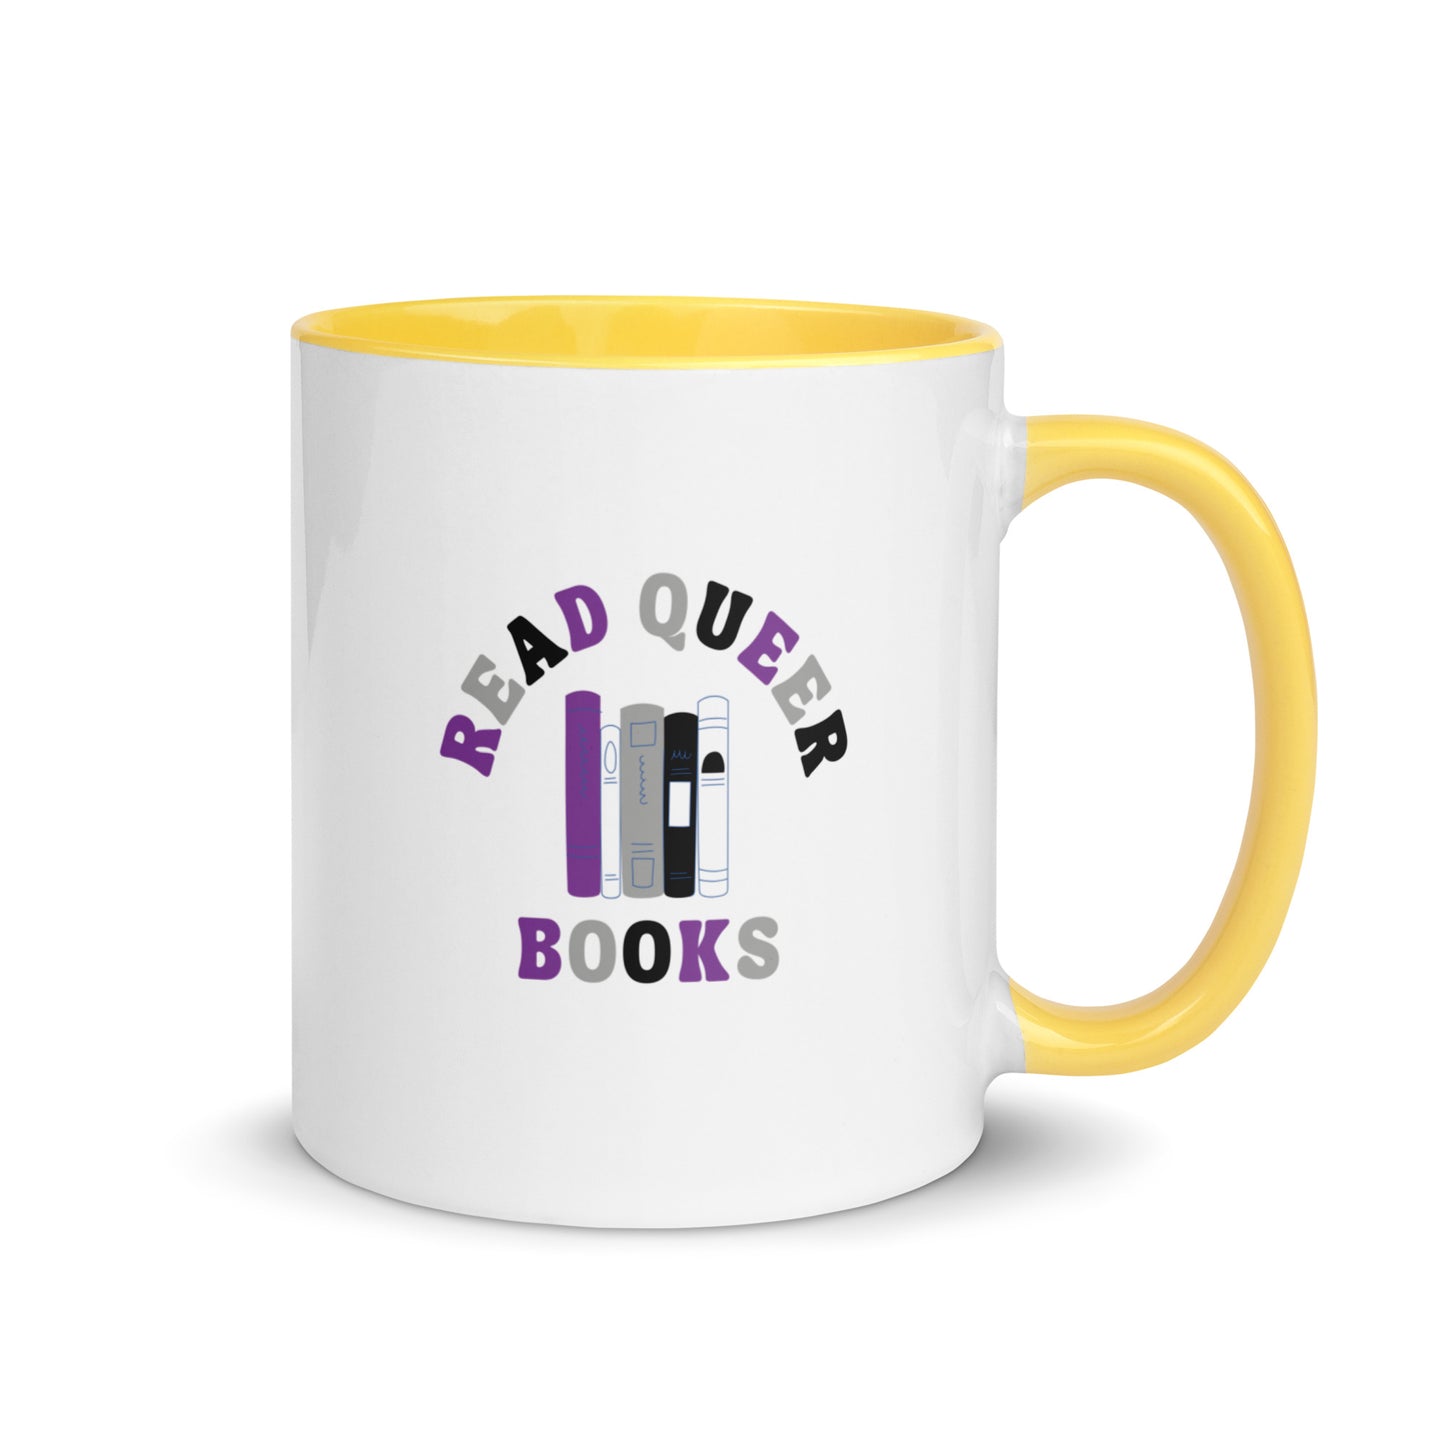 Read Queer Books (Asexual Colors) Mug with Color Inside